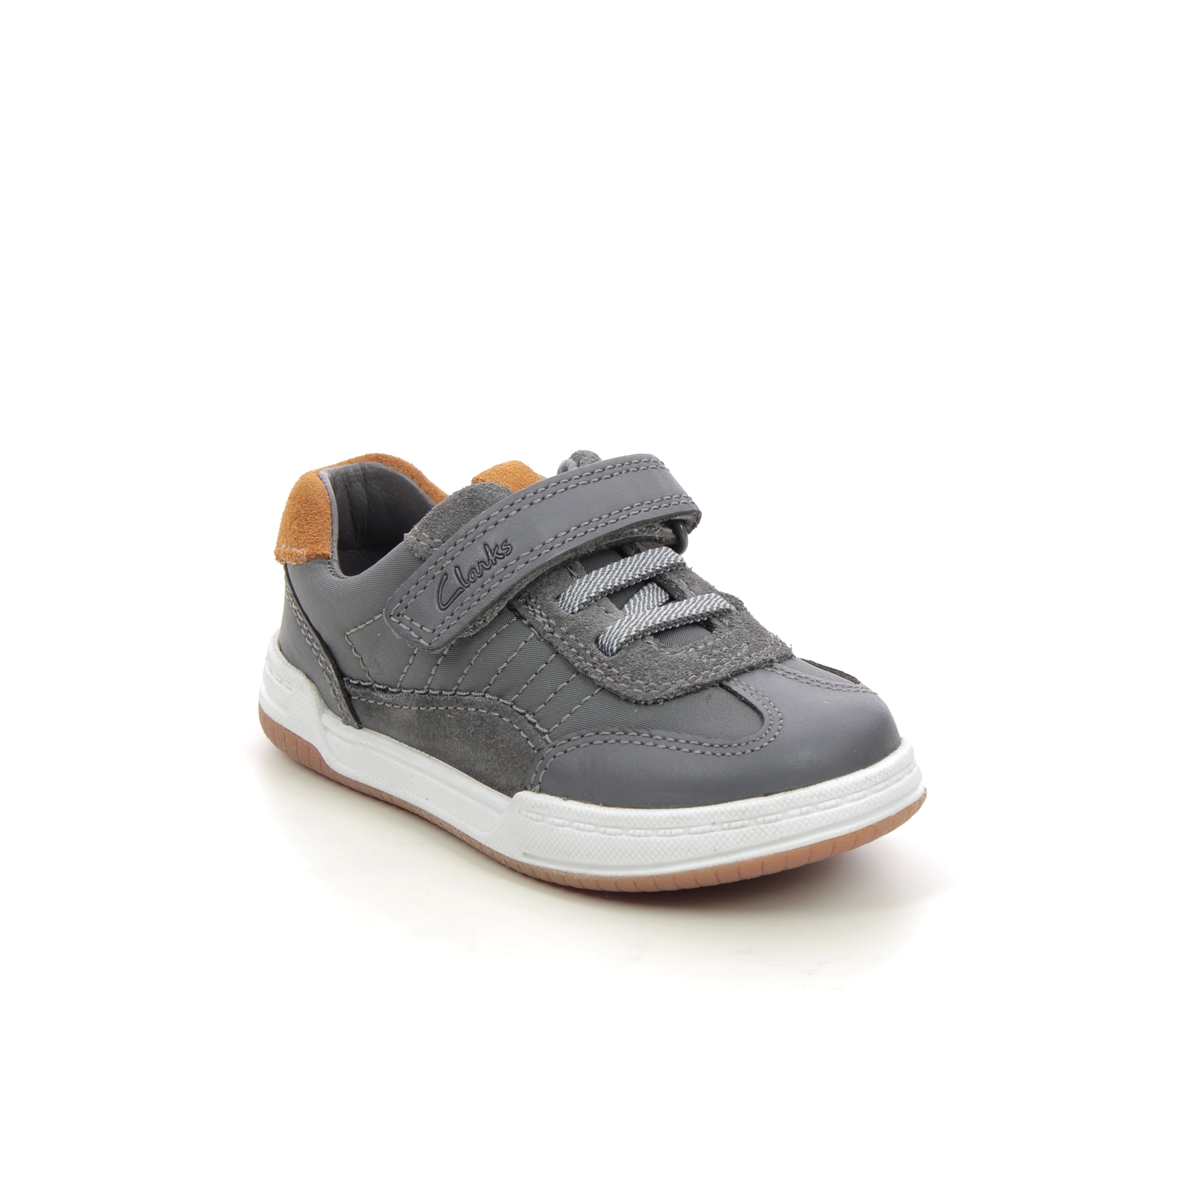 Clarks Fawn Family T Grey leather Kids Boys Toddler Shoes 7512-86F in a Plain Leather in Size 6.5